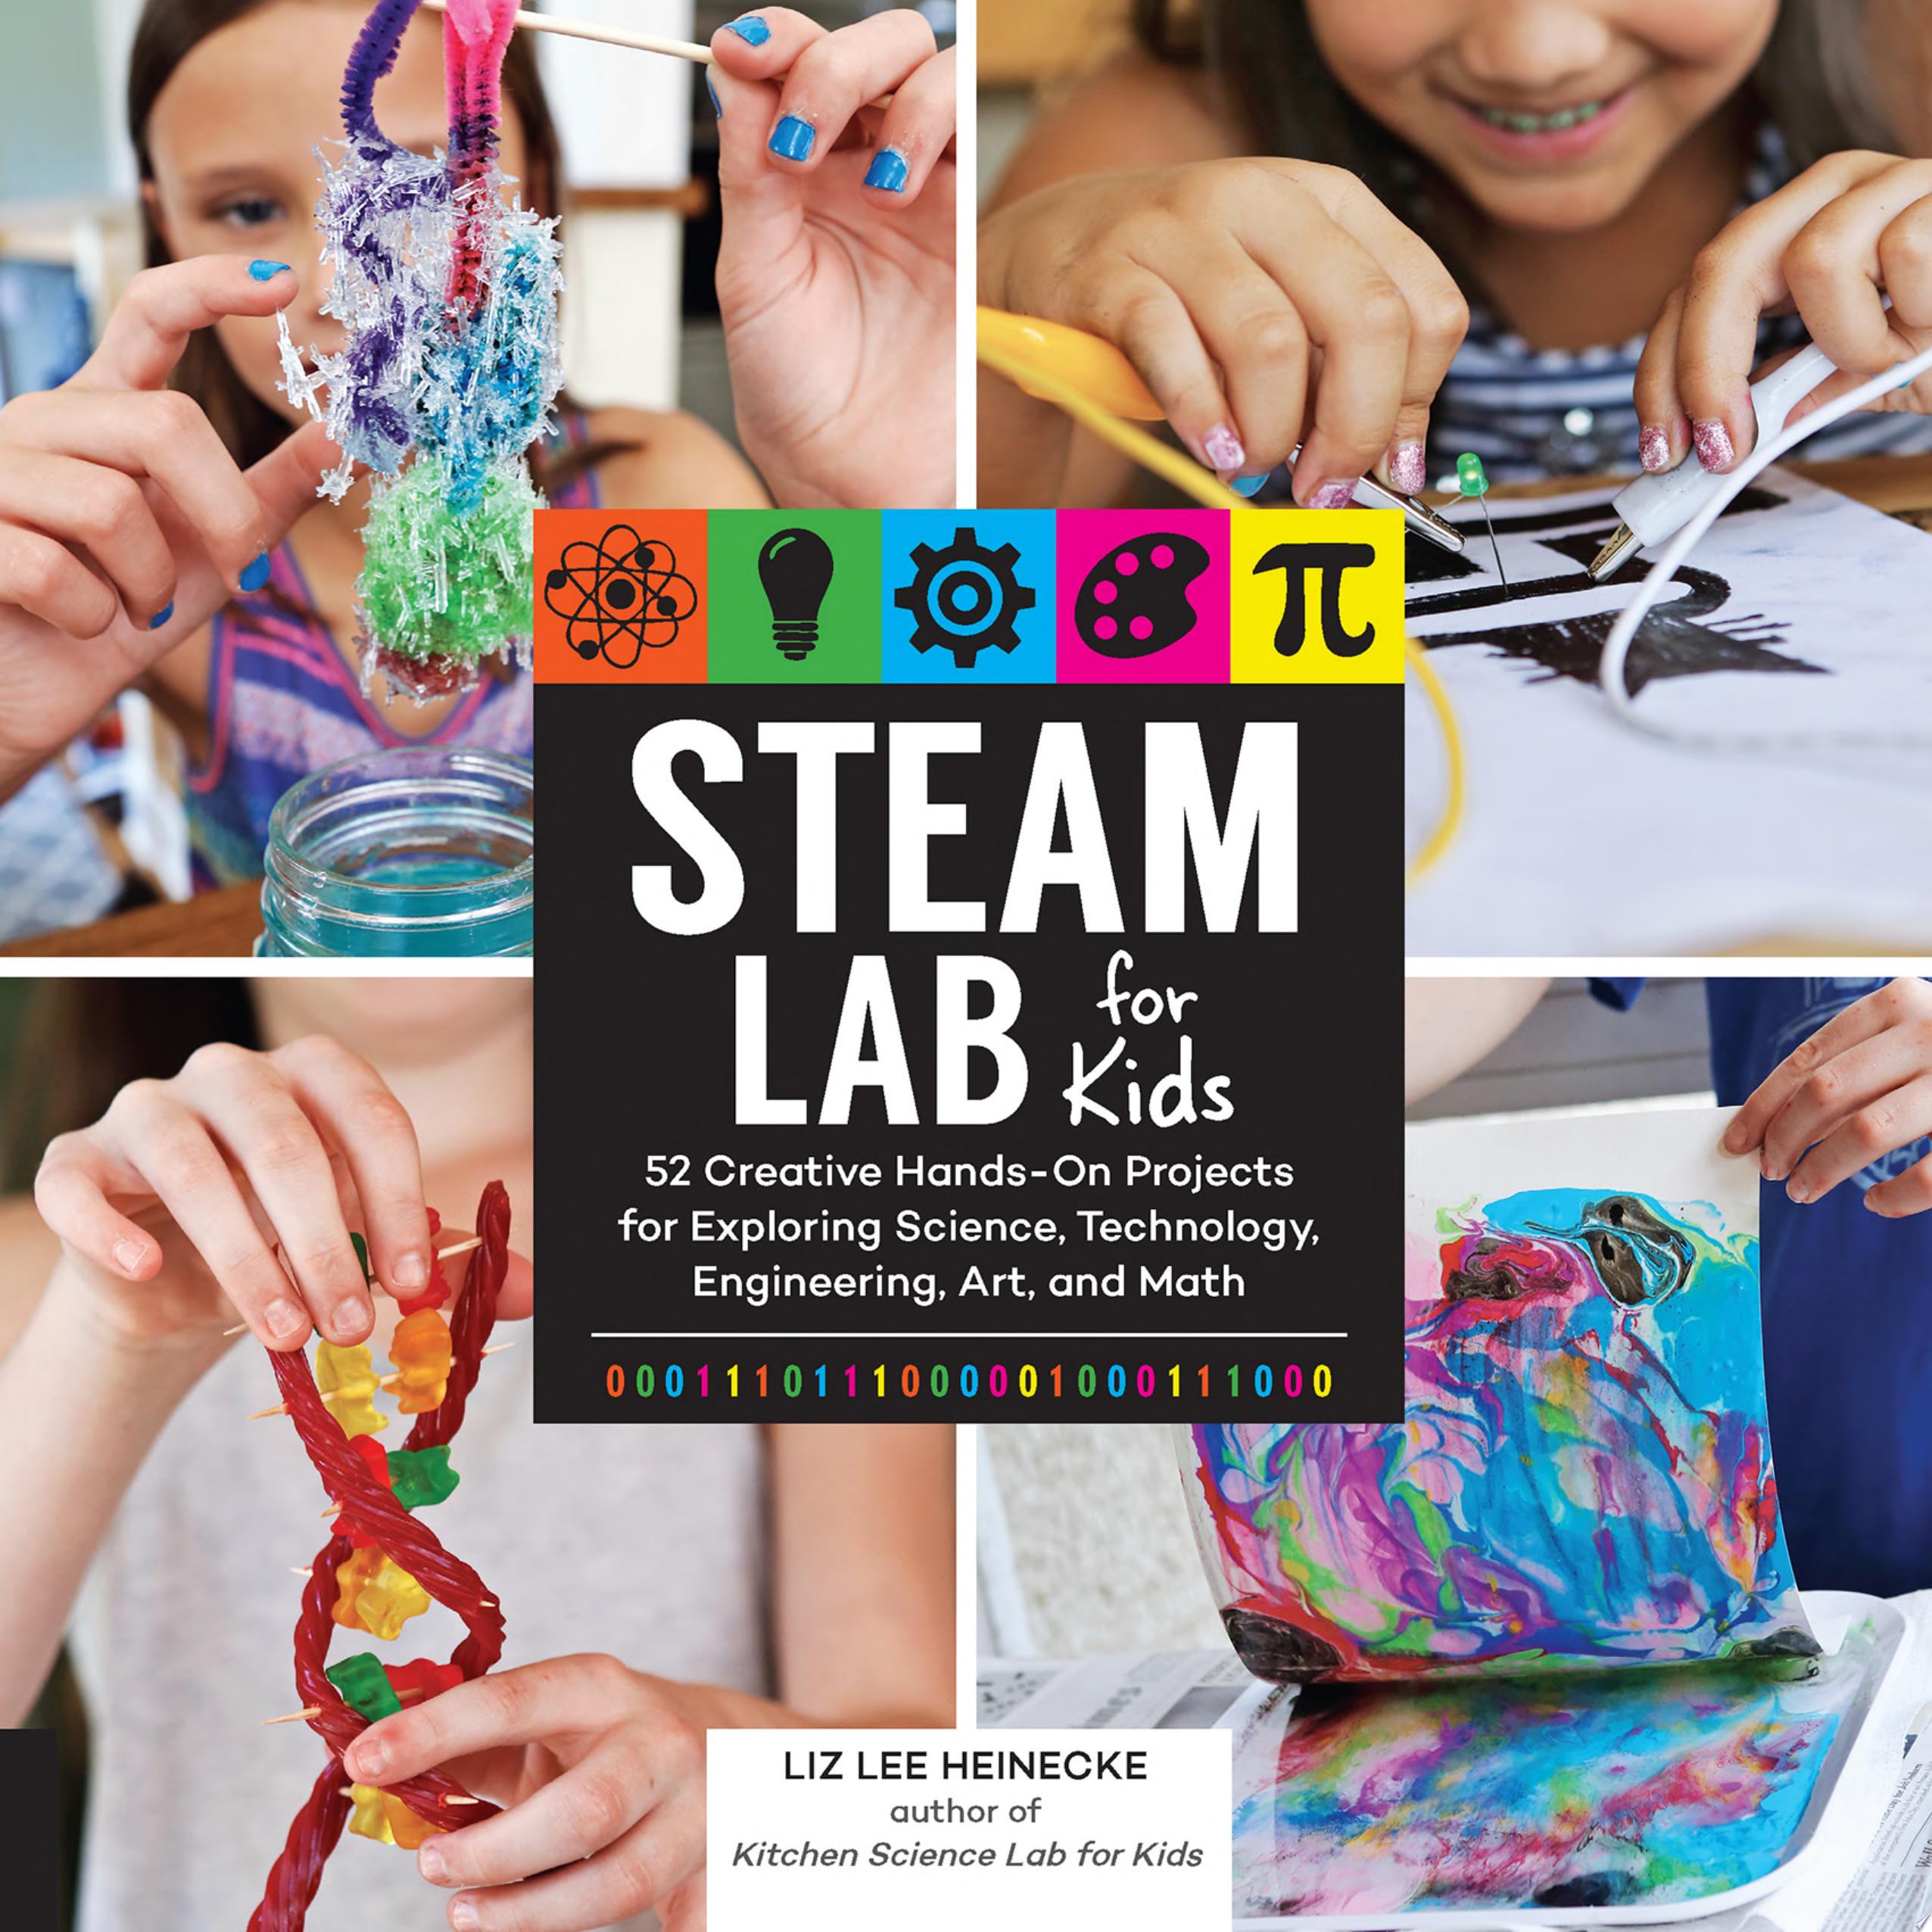 Image for "STEAM Lab for Kids"